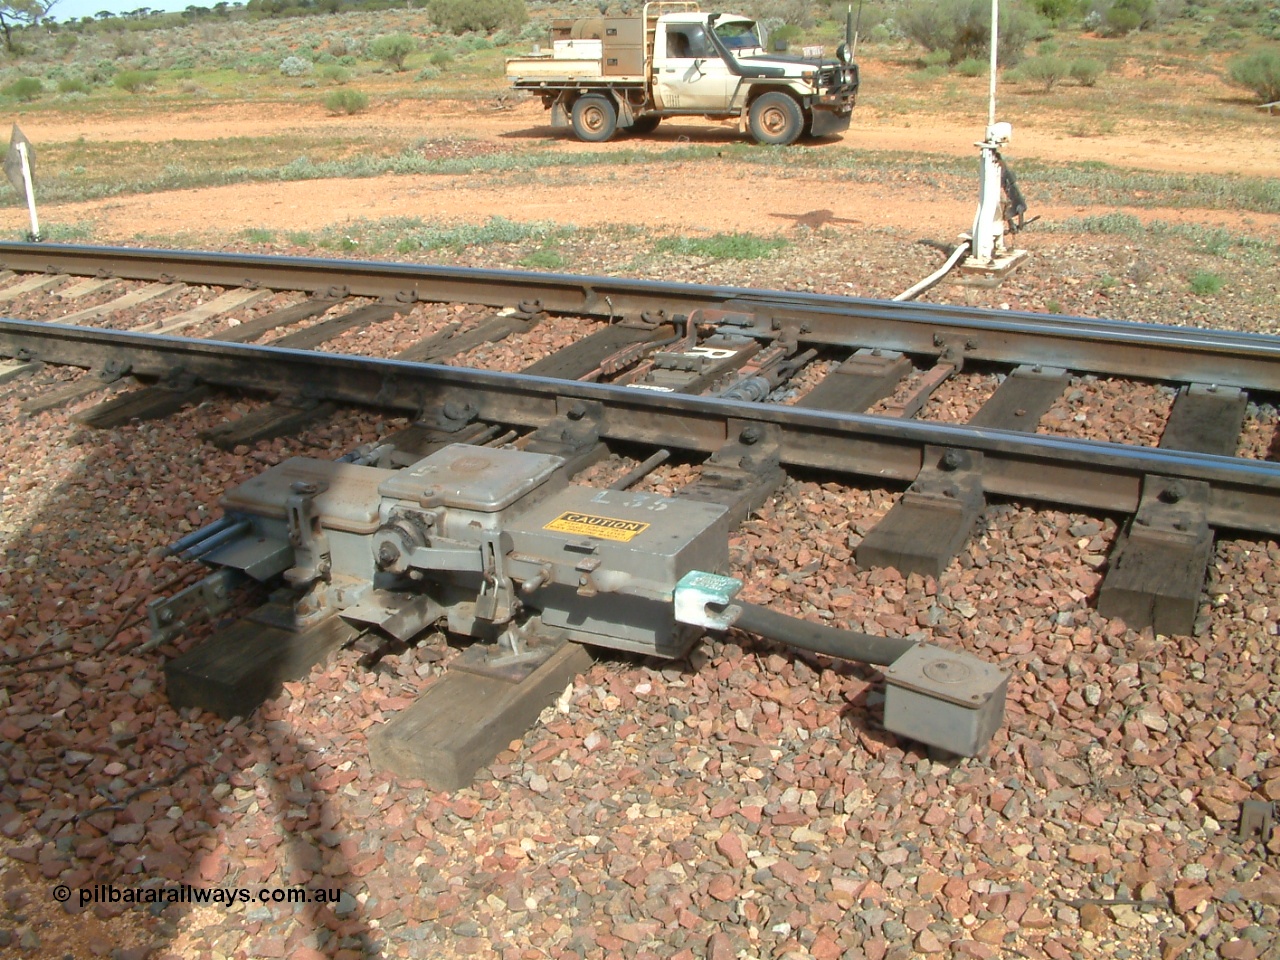 030415 135353
Kingoonya, located at the 426.5 km on the Trans Australian Railway, dual control point machine at eastern end of loop with manual lever and indicator opposite. [url=https://goo.gl/maps/7TMcikXj33EqWvyCA]GeoData location[/url].
